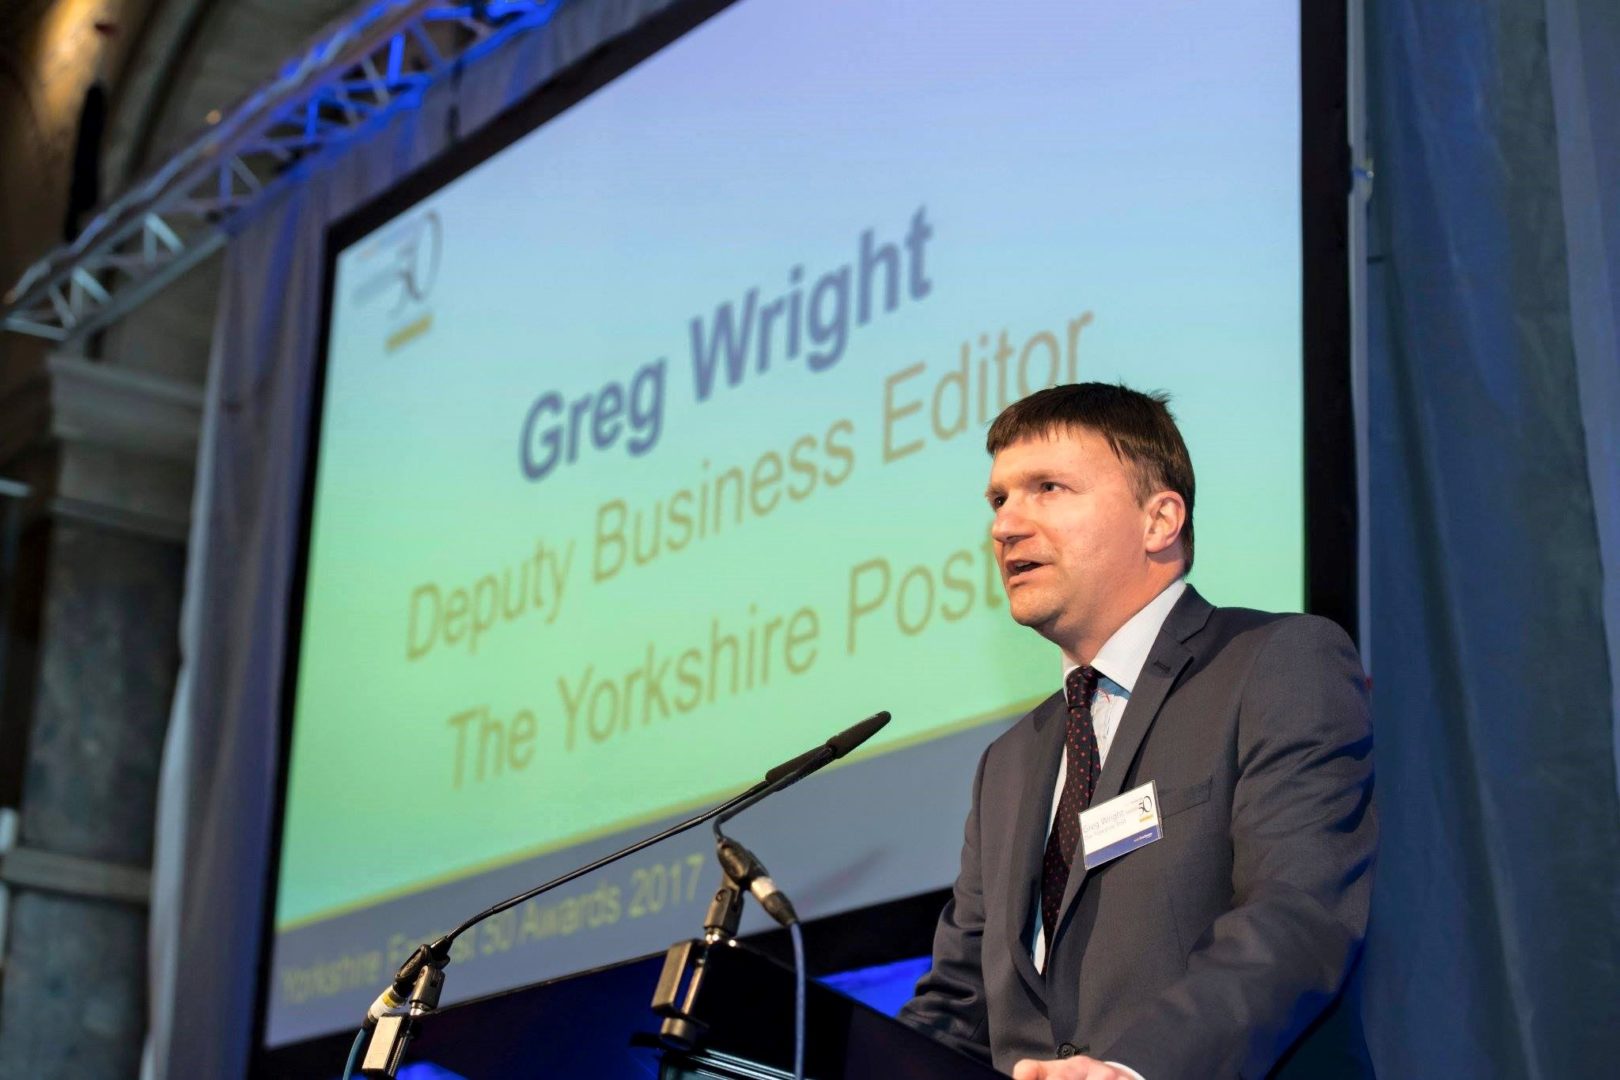 Greg Wright, Business Editor at the Yorkshire Post, stands at a lectern speaking